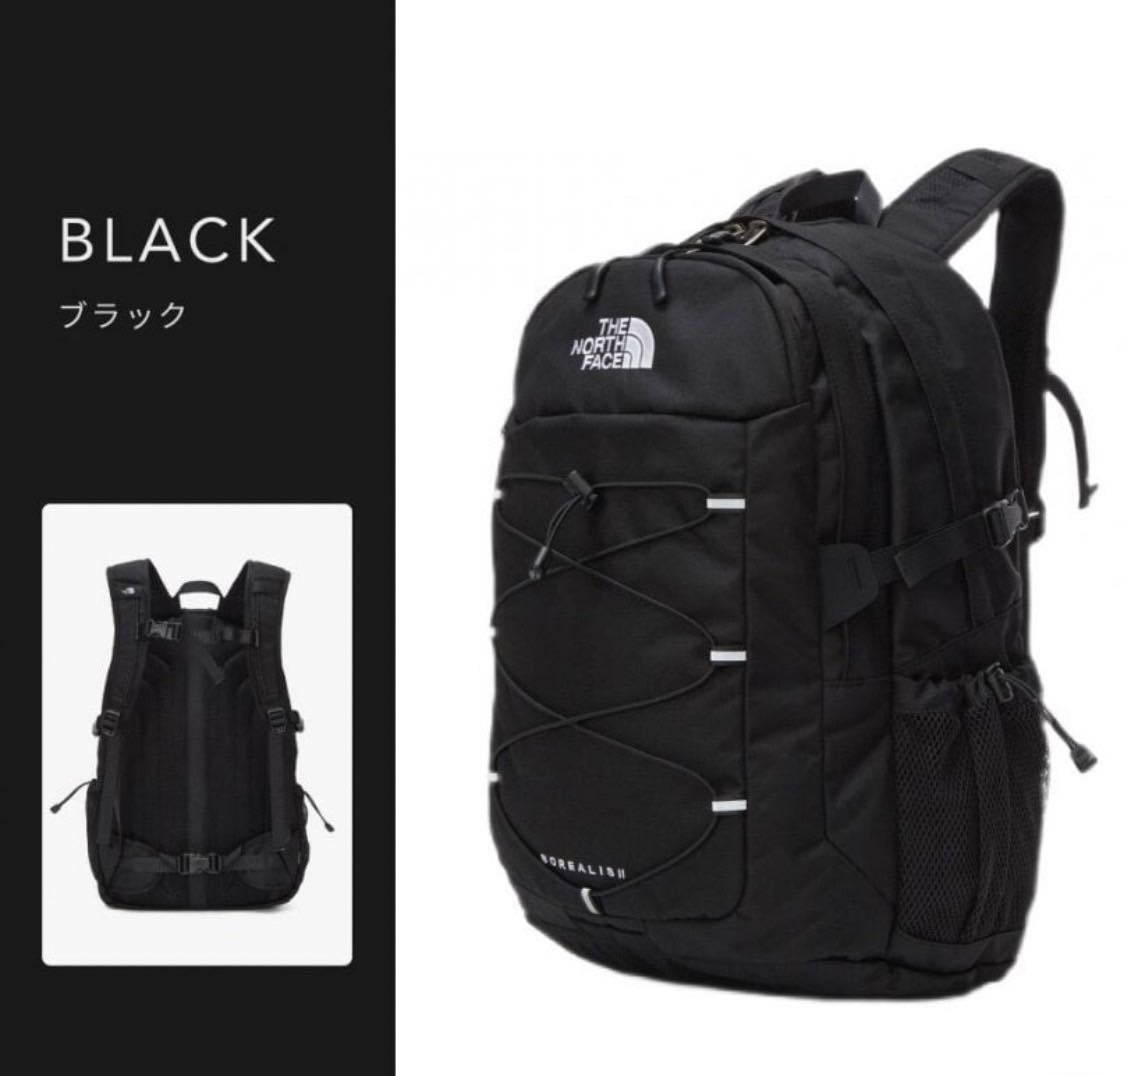 THE NORTH FACE ザ・ノース・フェイス NM2DN53A WHITE LABEL BOREALIS II ボレアリス2 バックパック リュックサック 30L 大容量_画像2